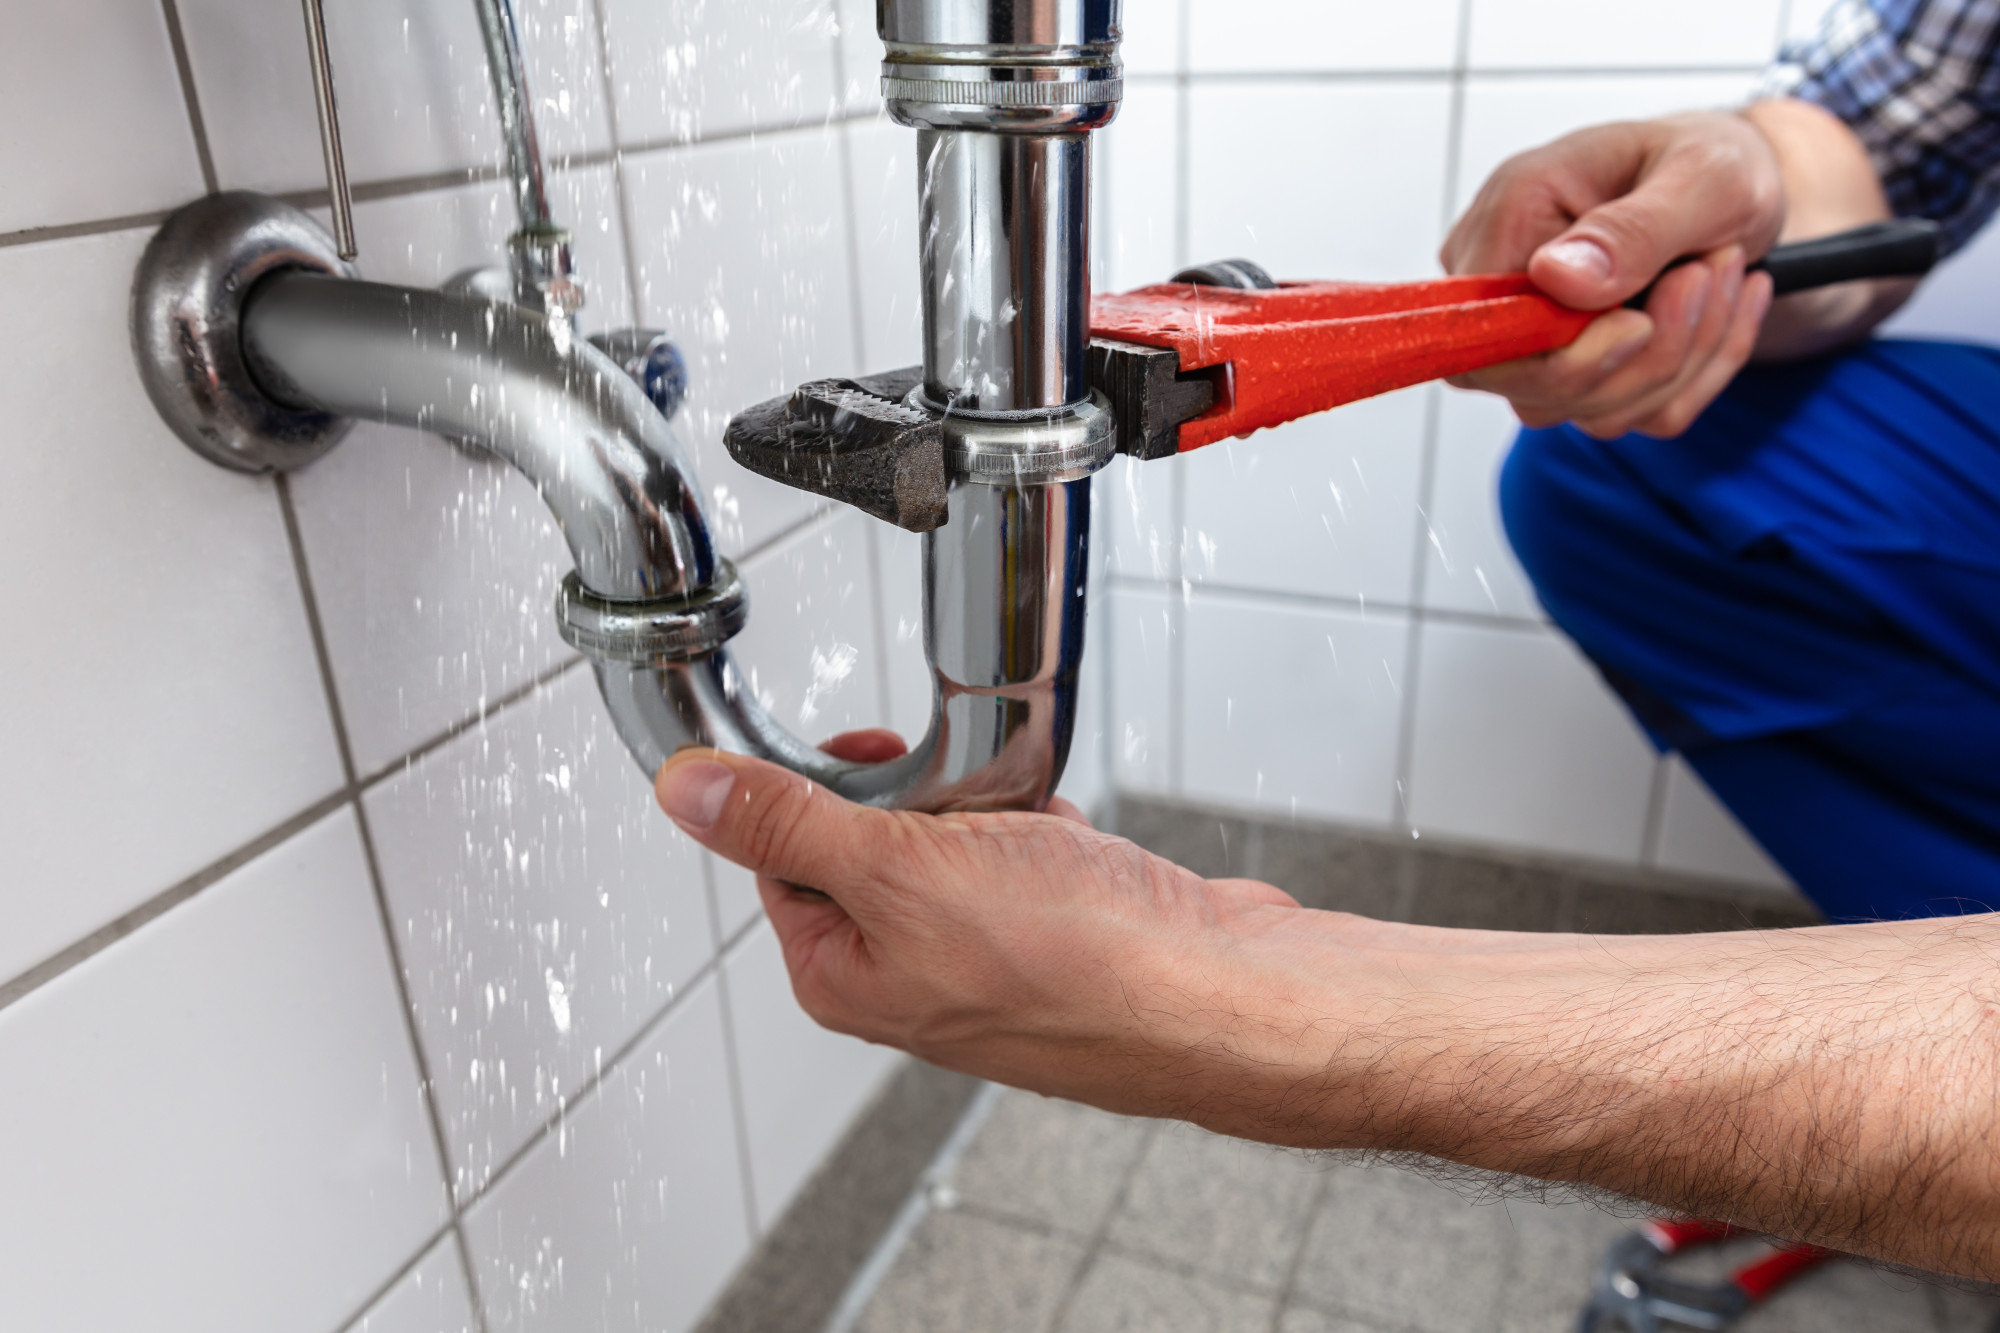 How to Troubleshoot Common Plumbing Issues at Home